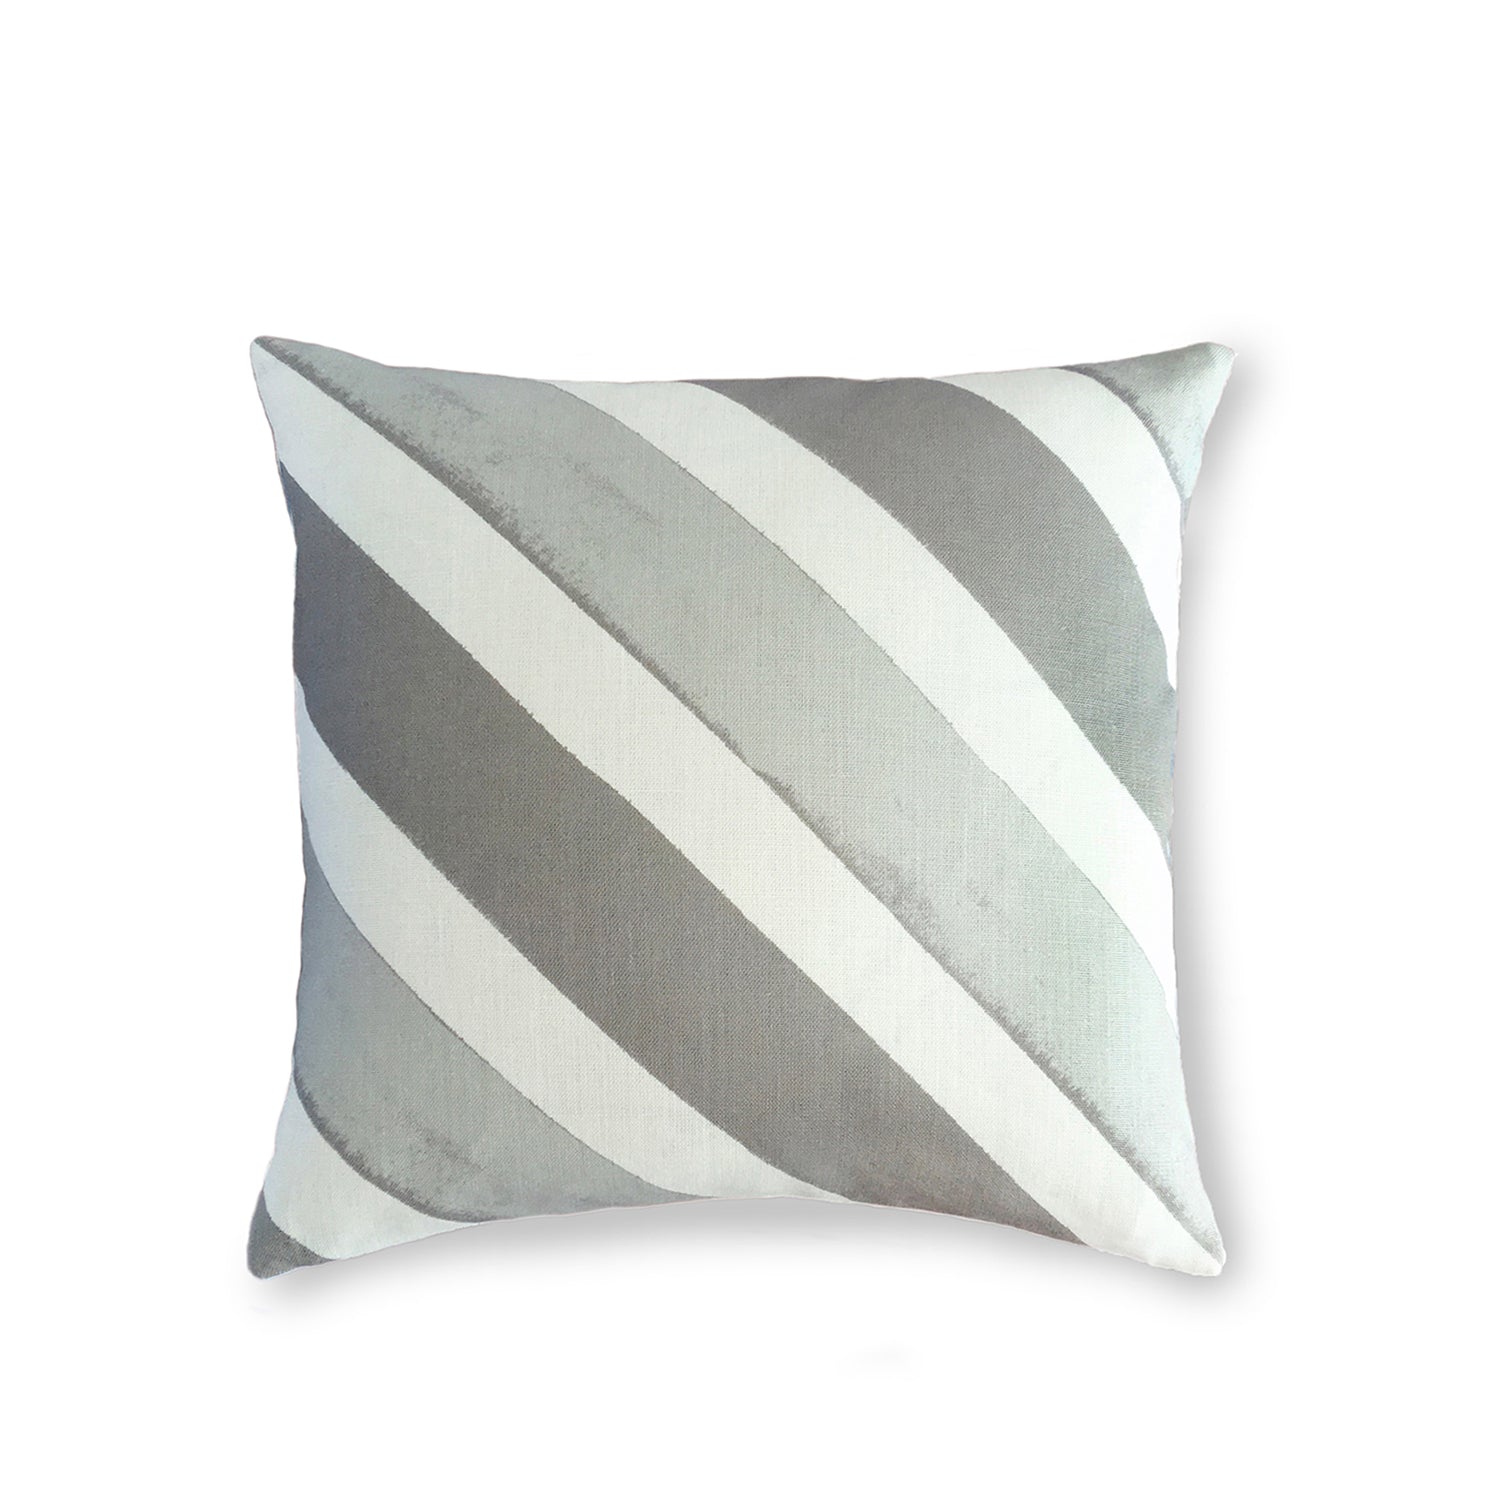 Square throw pillow in a large-scale diagonal stripe pattern in shades of gray on a white field.